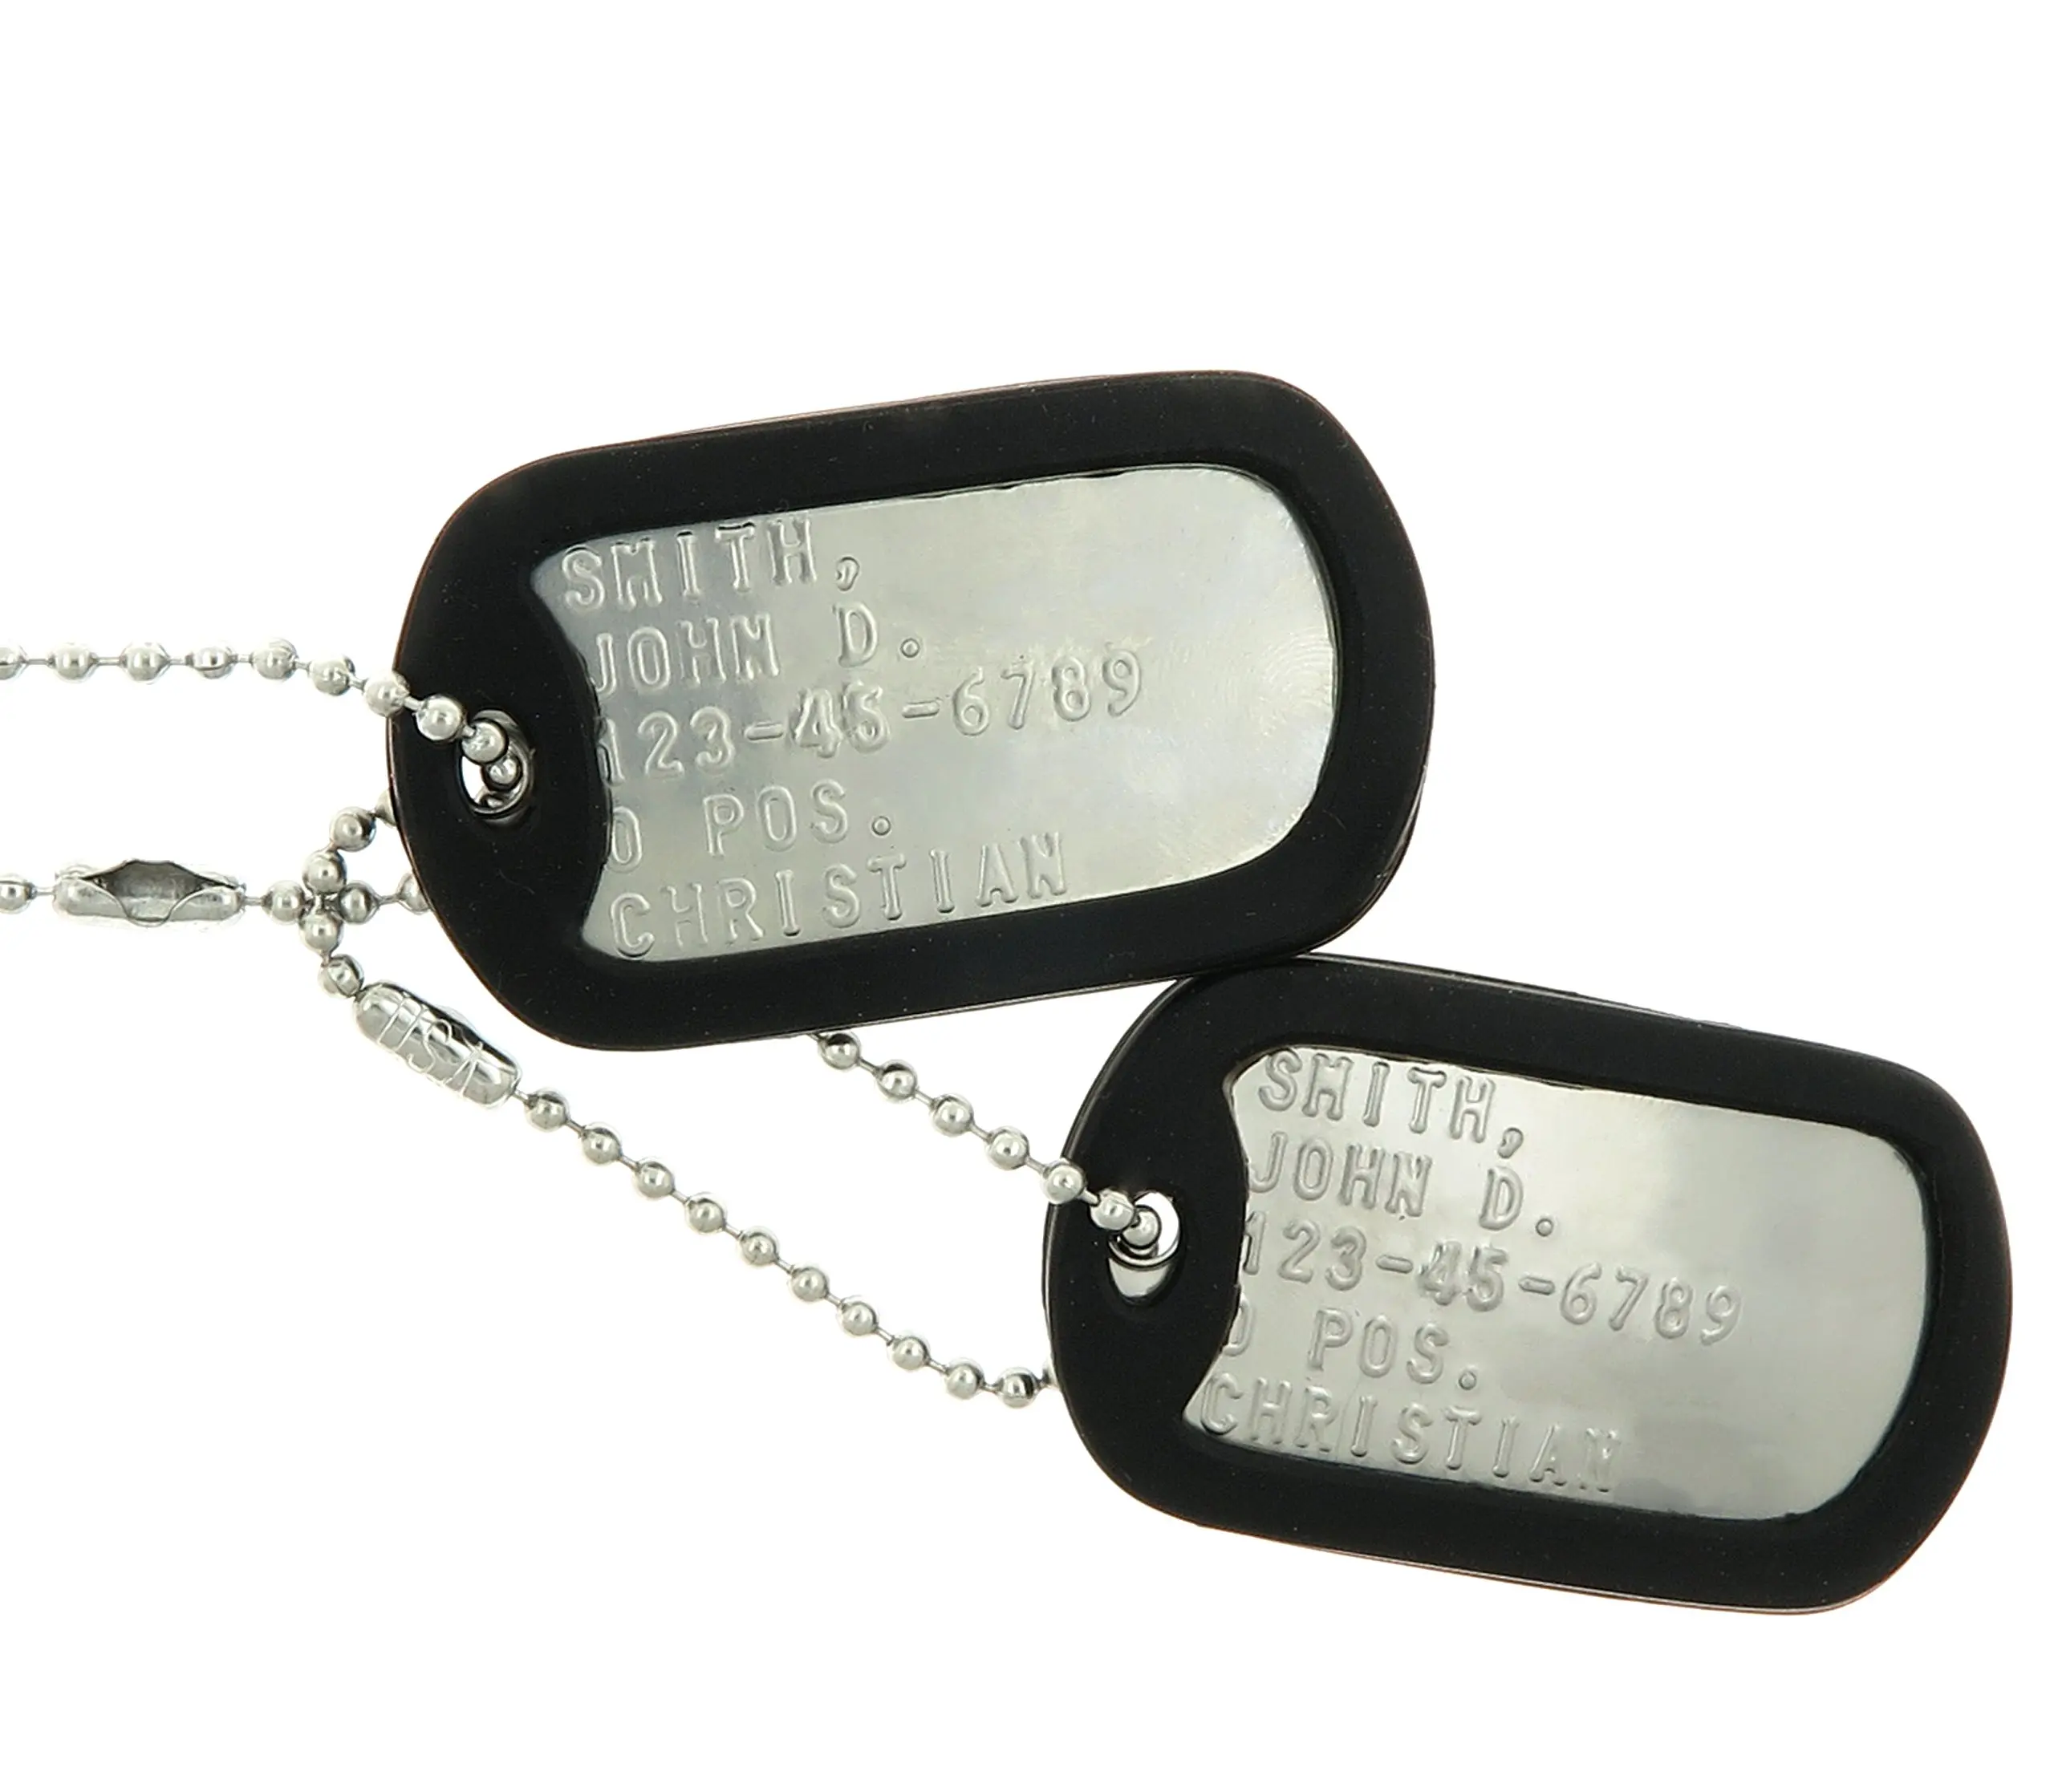 military dog tags personalized